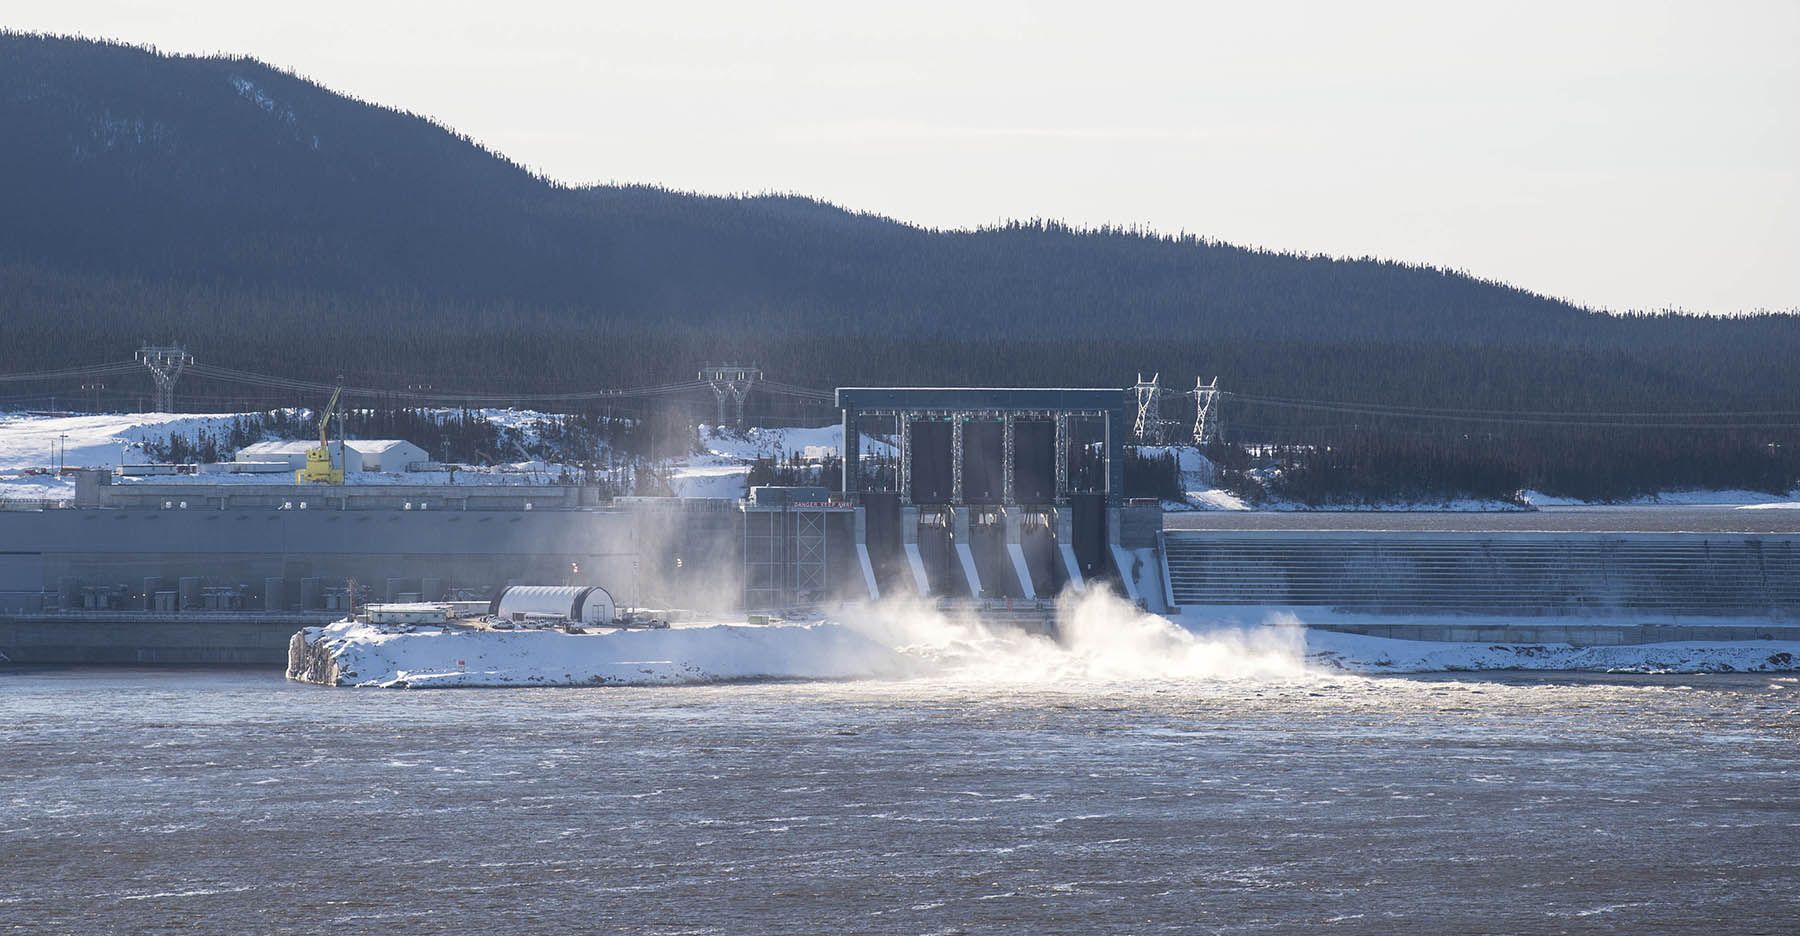 Muskrat Falls Gereating Facility on the Churchill River near Happy Valley-Goose Bay, Labrador. Image by Michael Seamans / The Weather Channel. Canada, 2019.